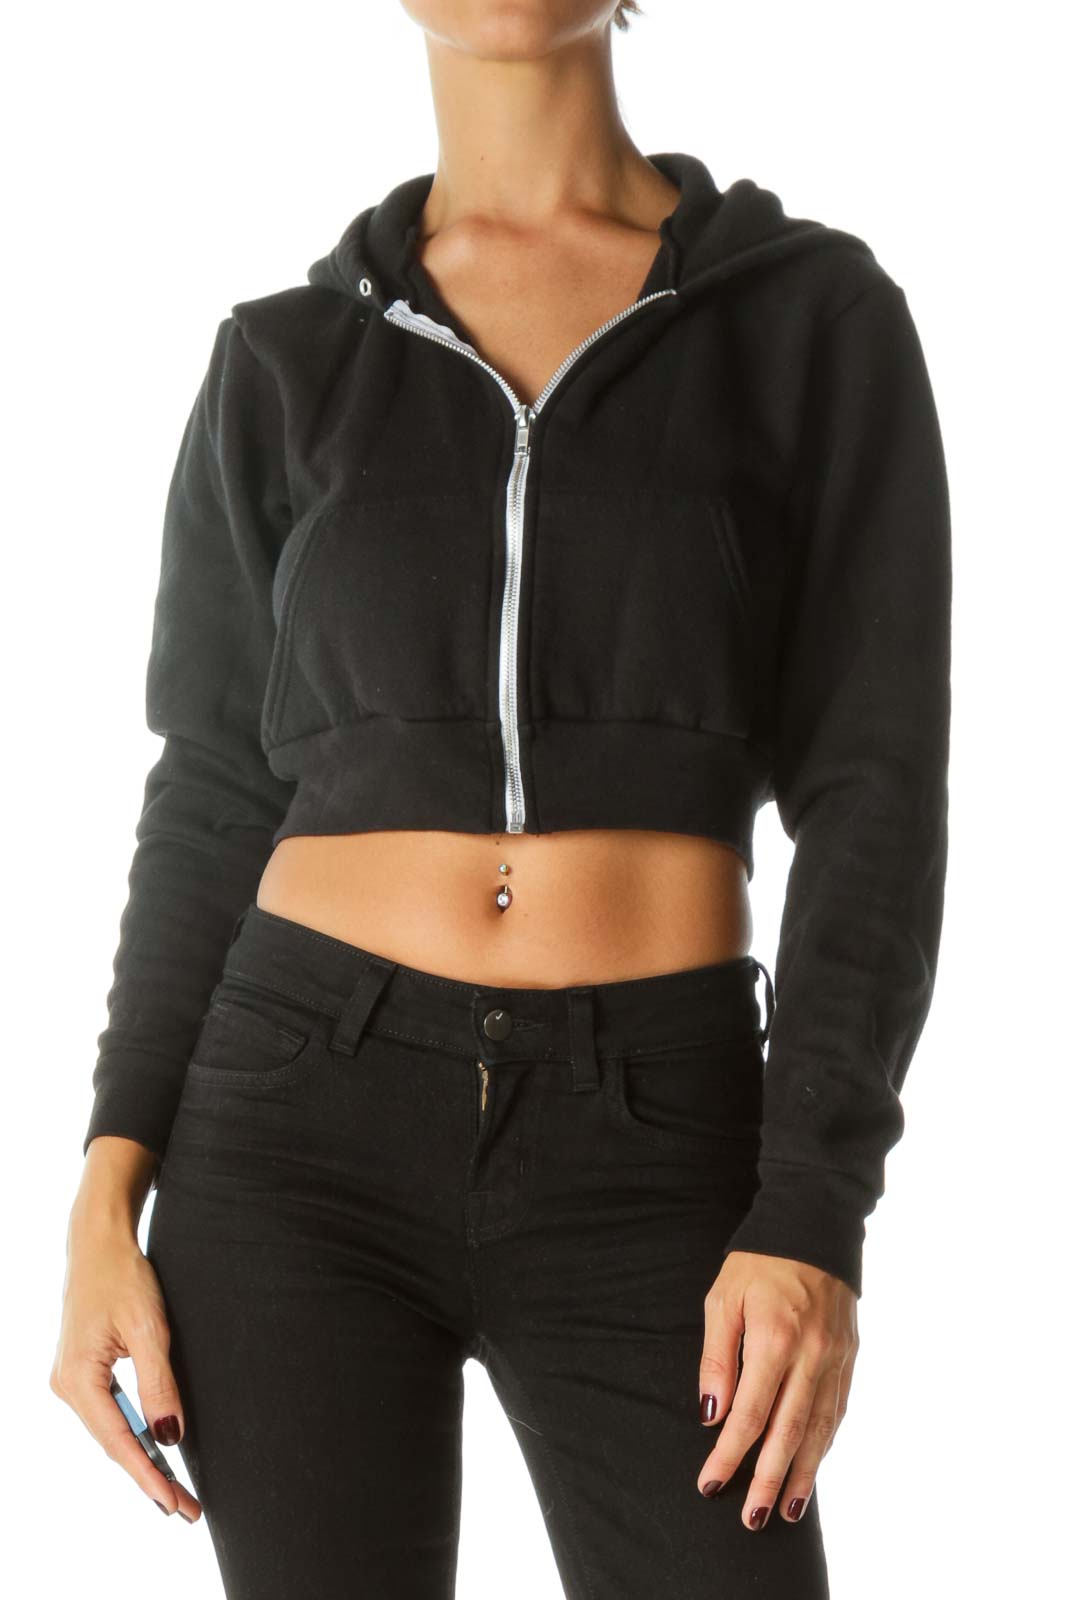 Black Hooded Zippered Crop Sweat Jacket Front